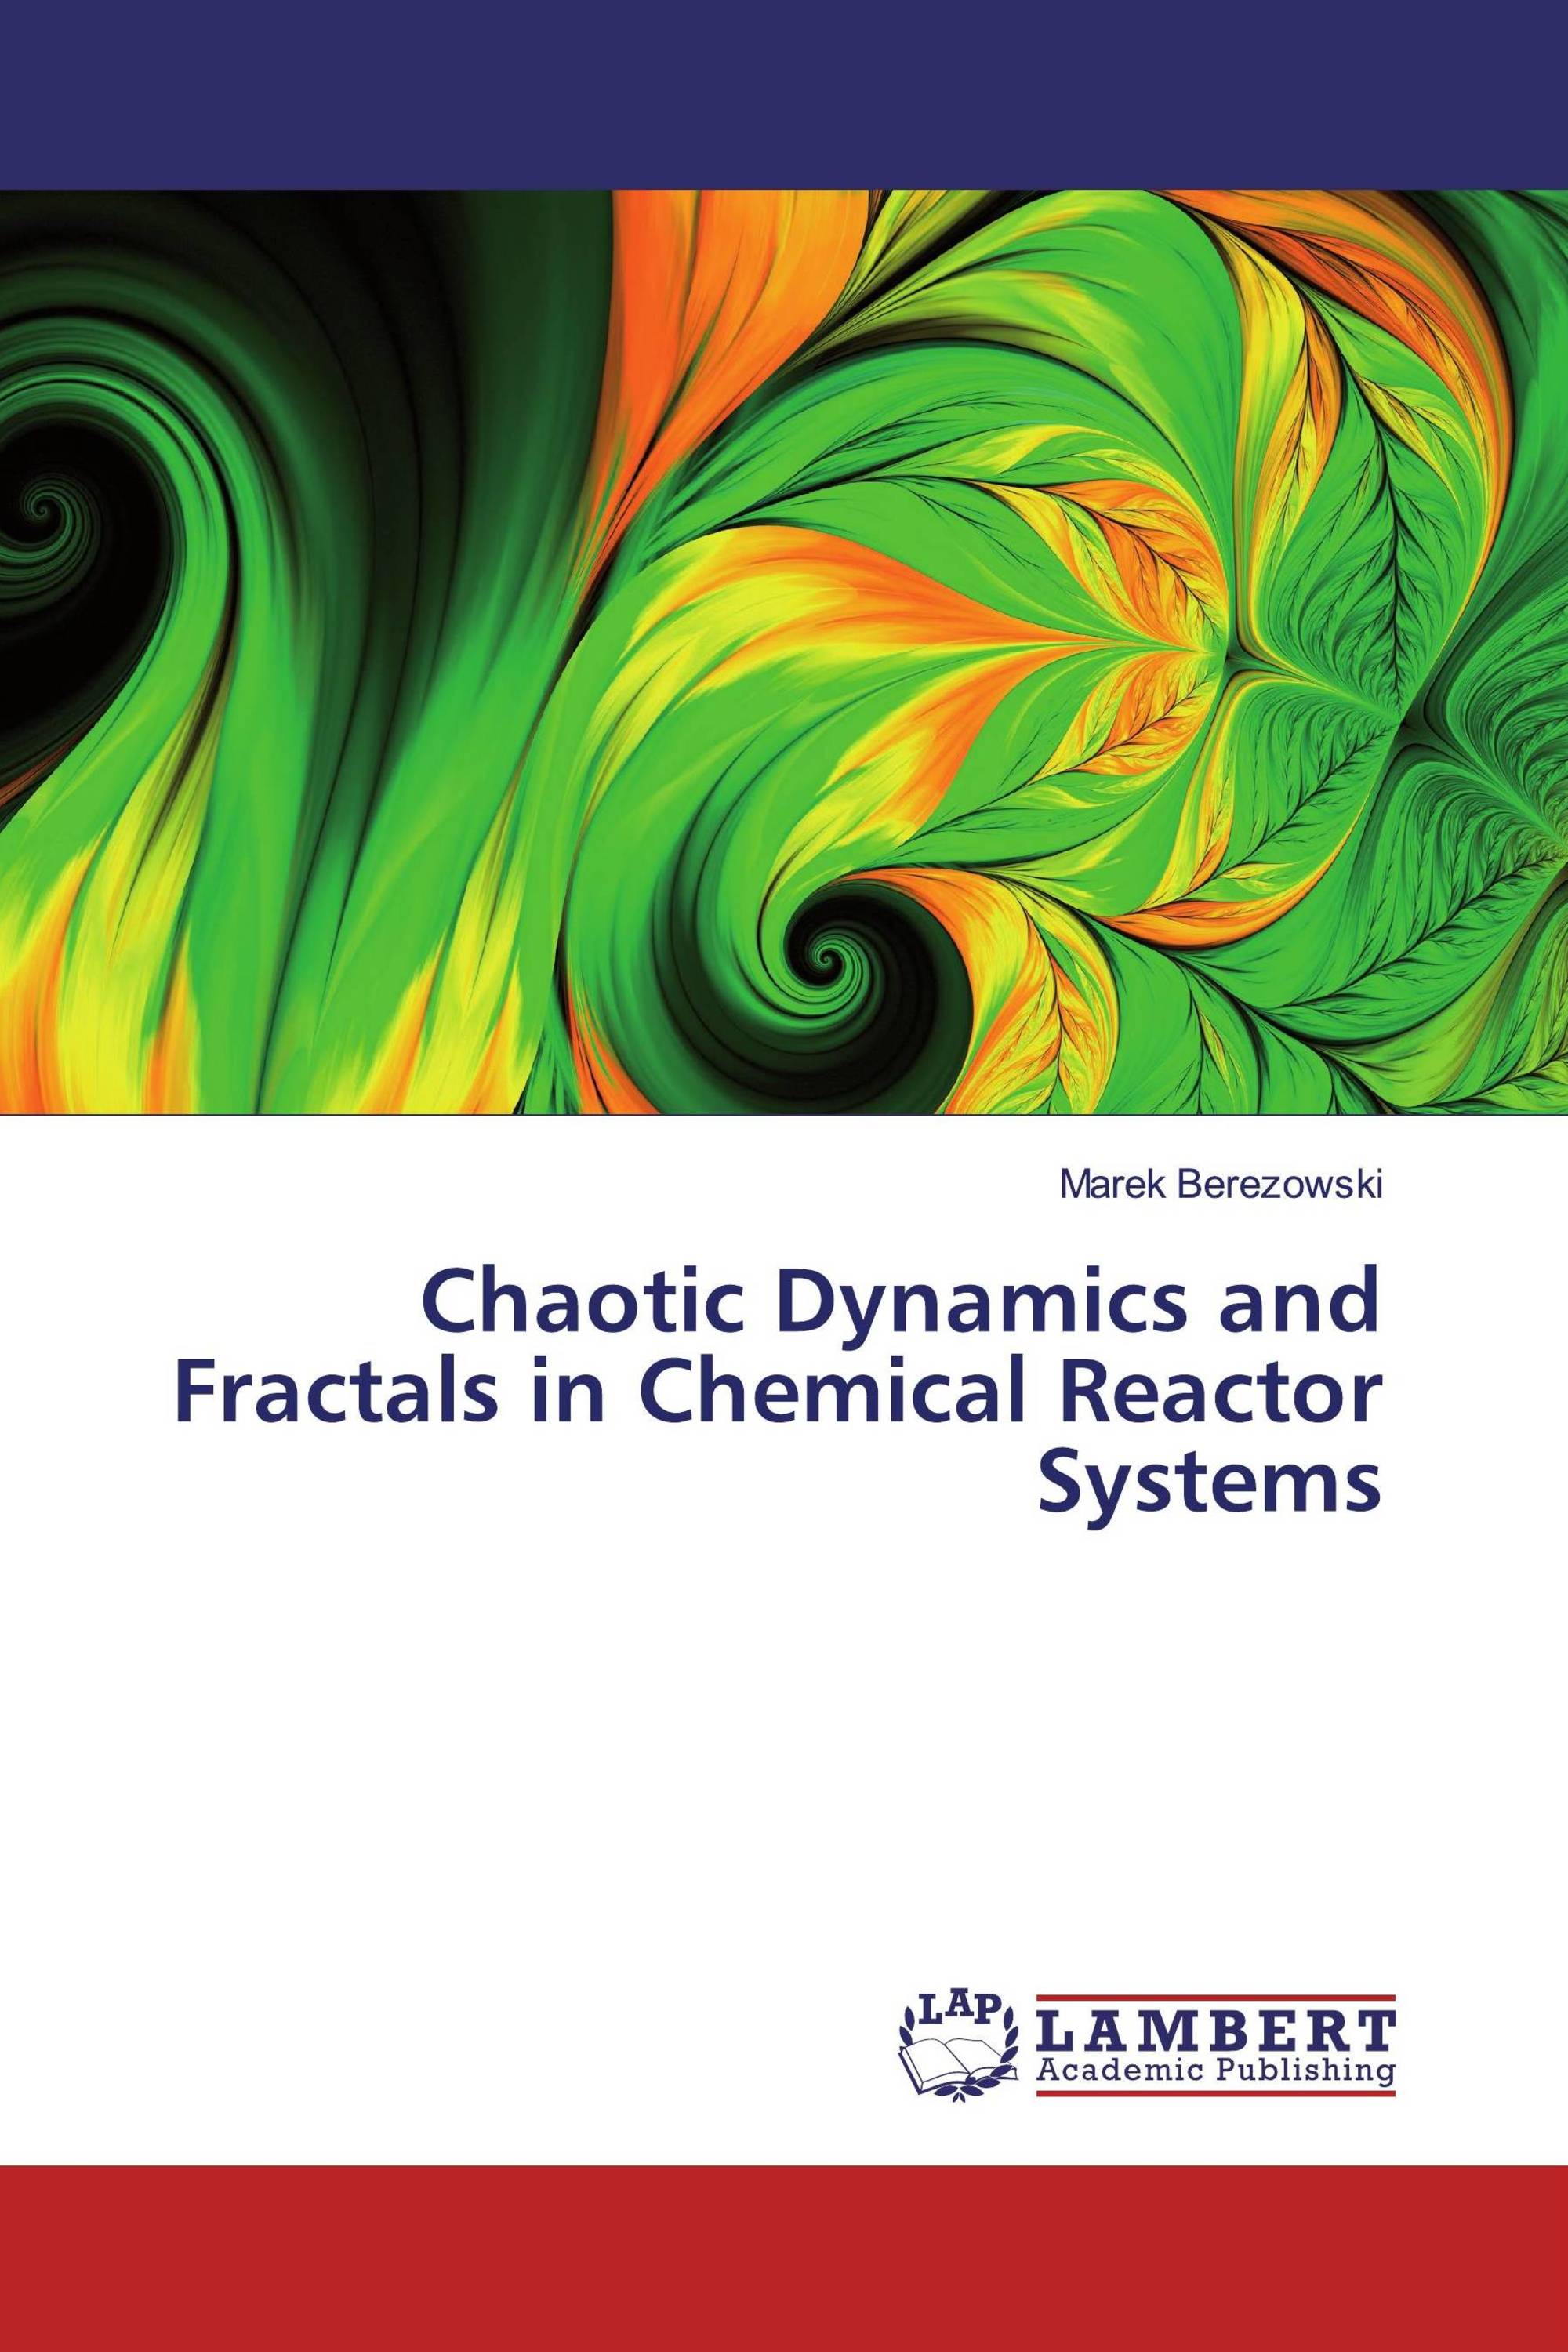 Chaotic Dynamics and Fractals in Chemical Reactor Systems